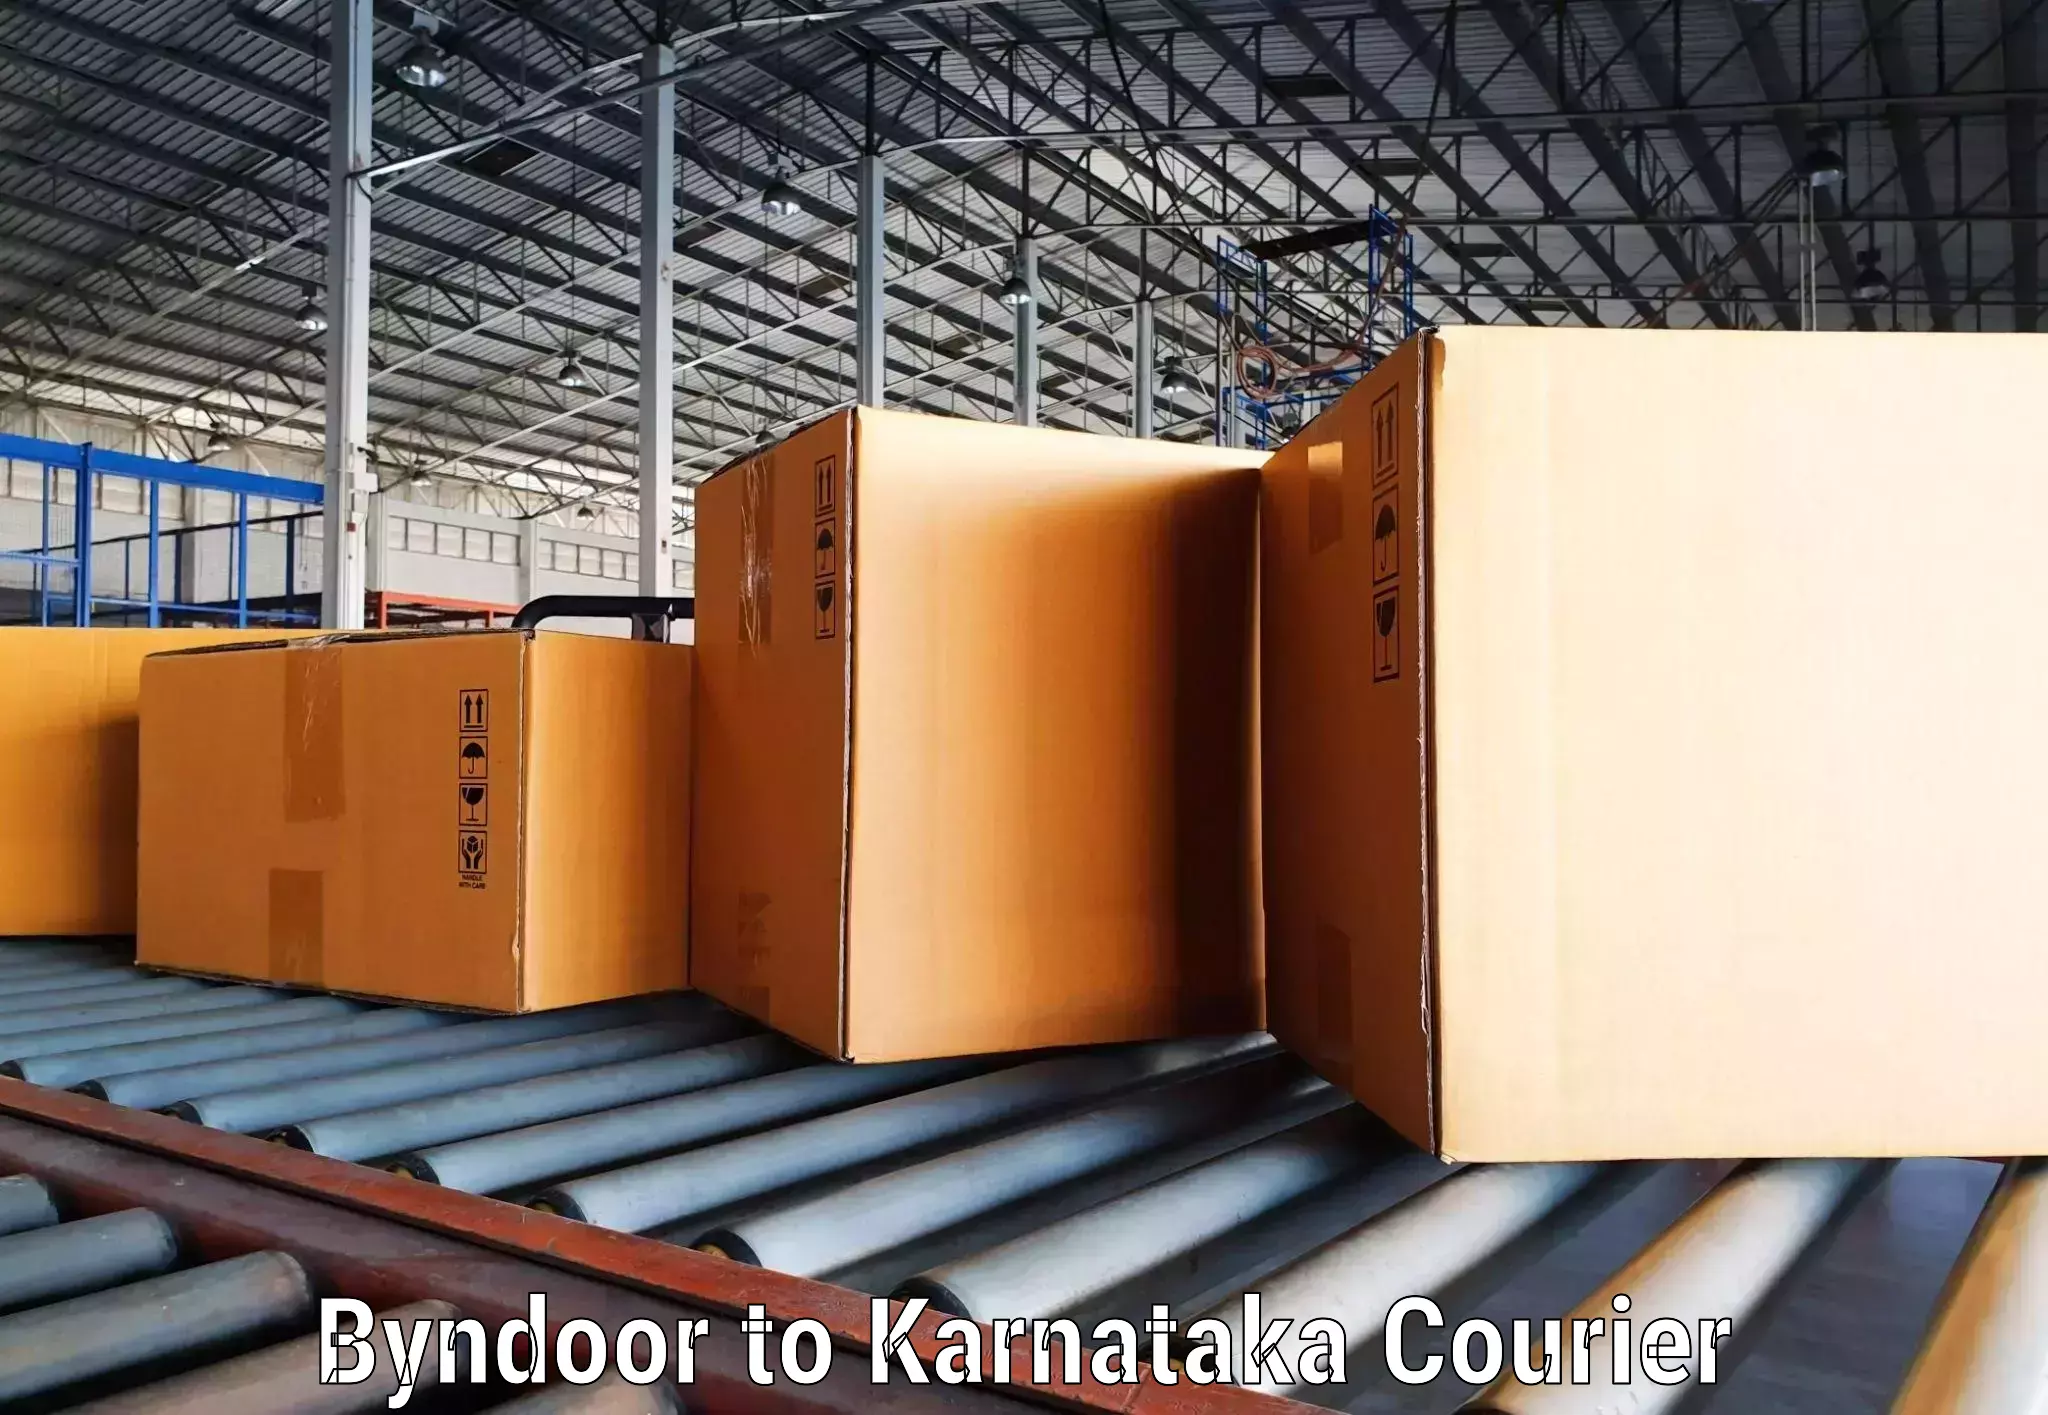 Reliable delivery network Byndoor to Karnataka